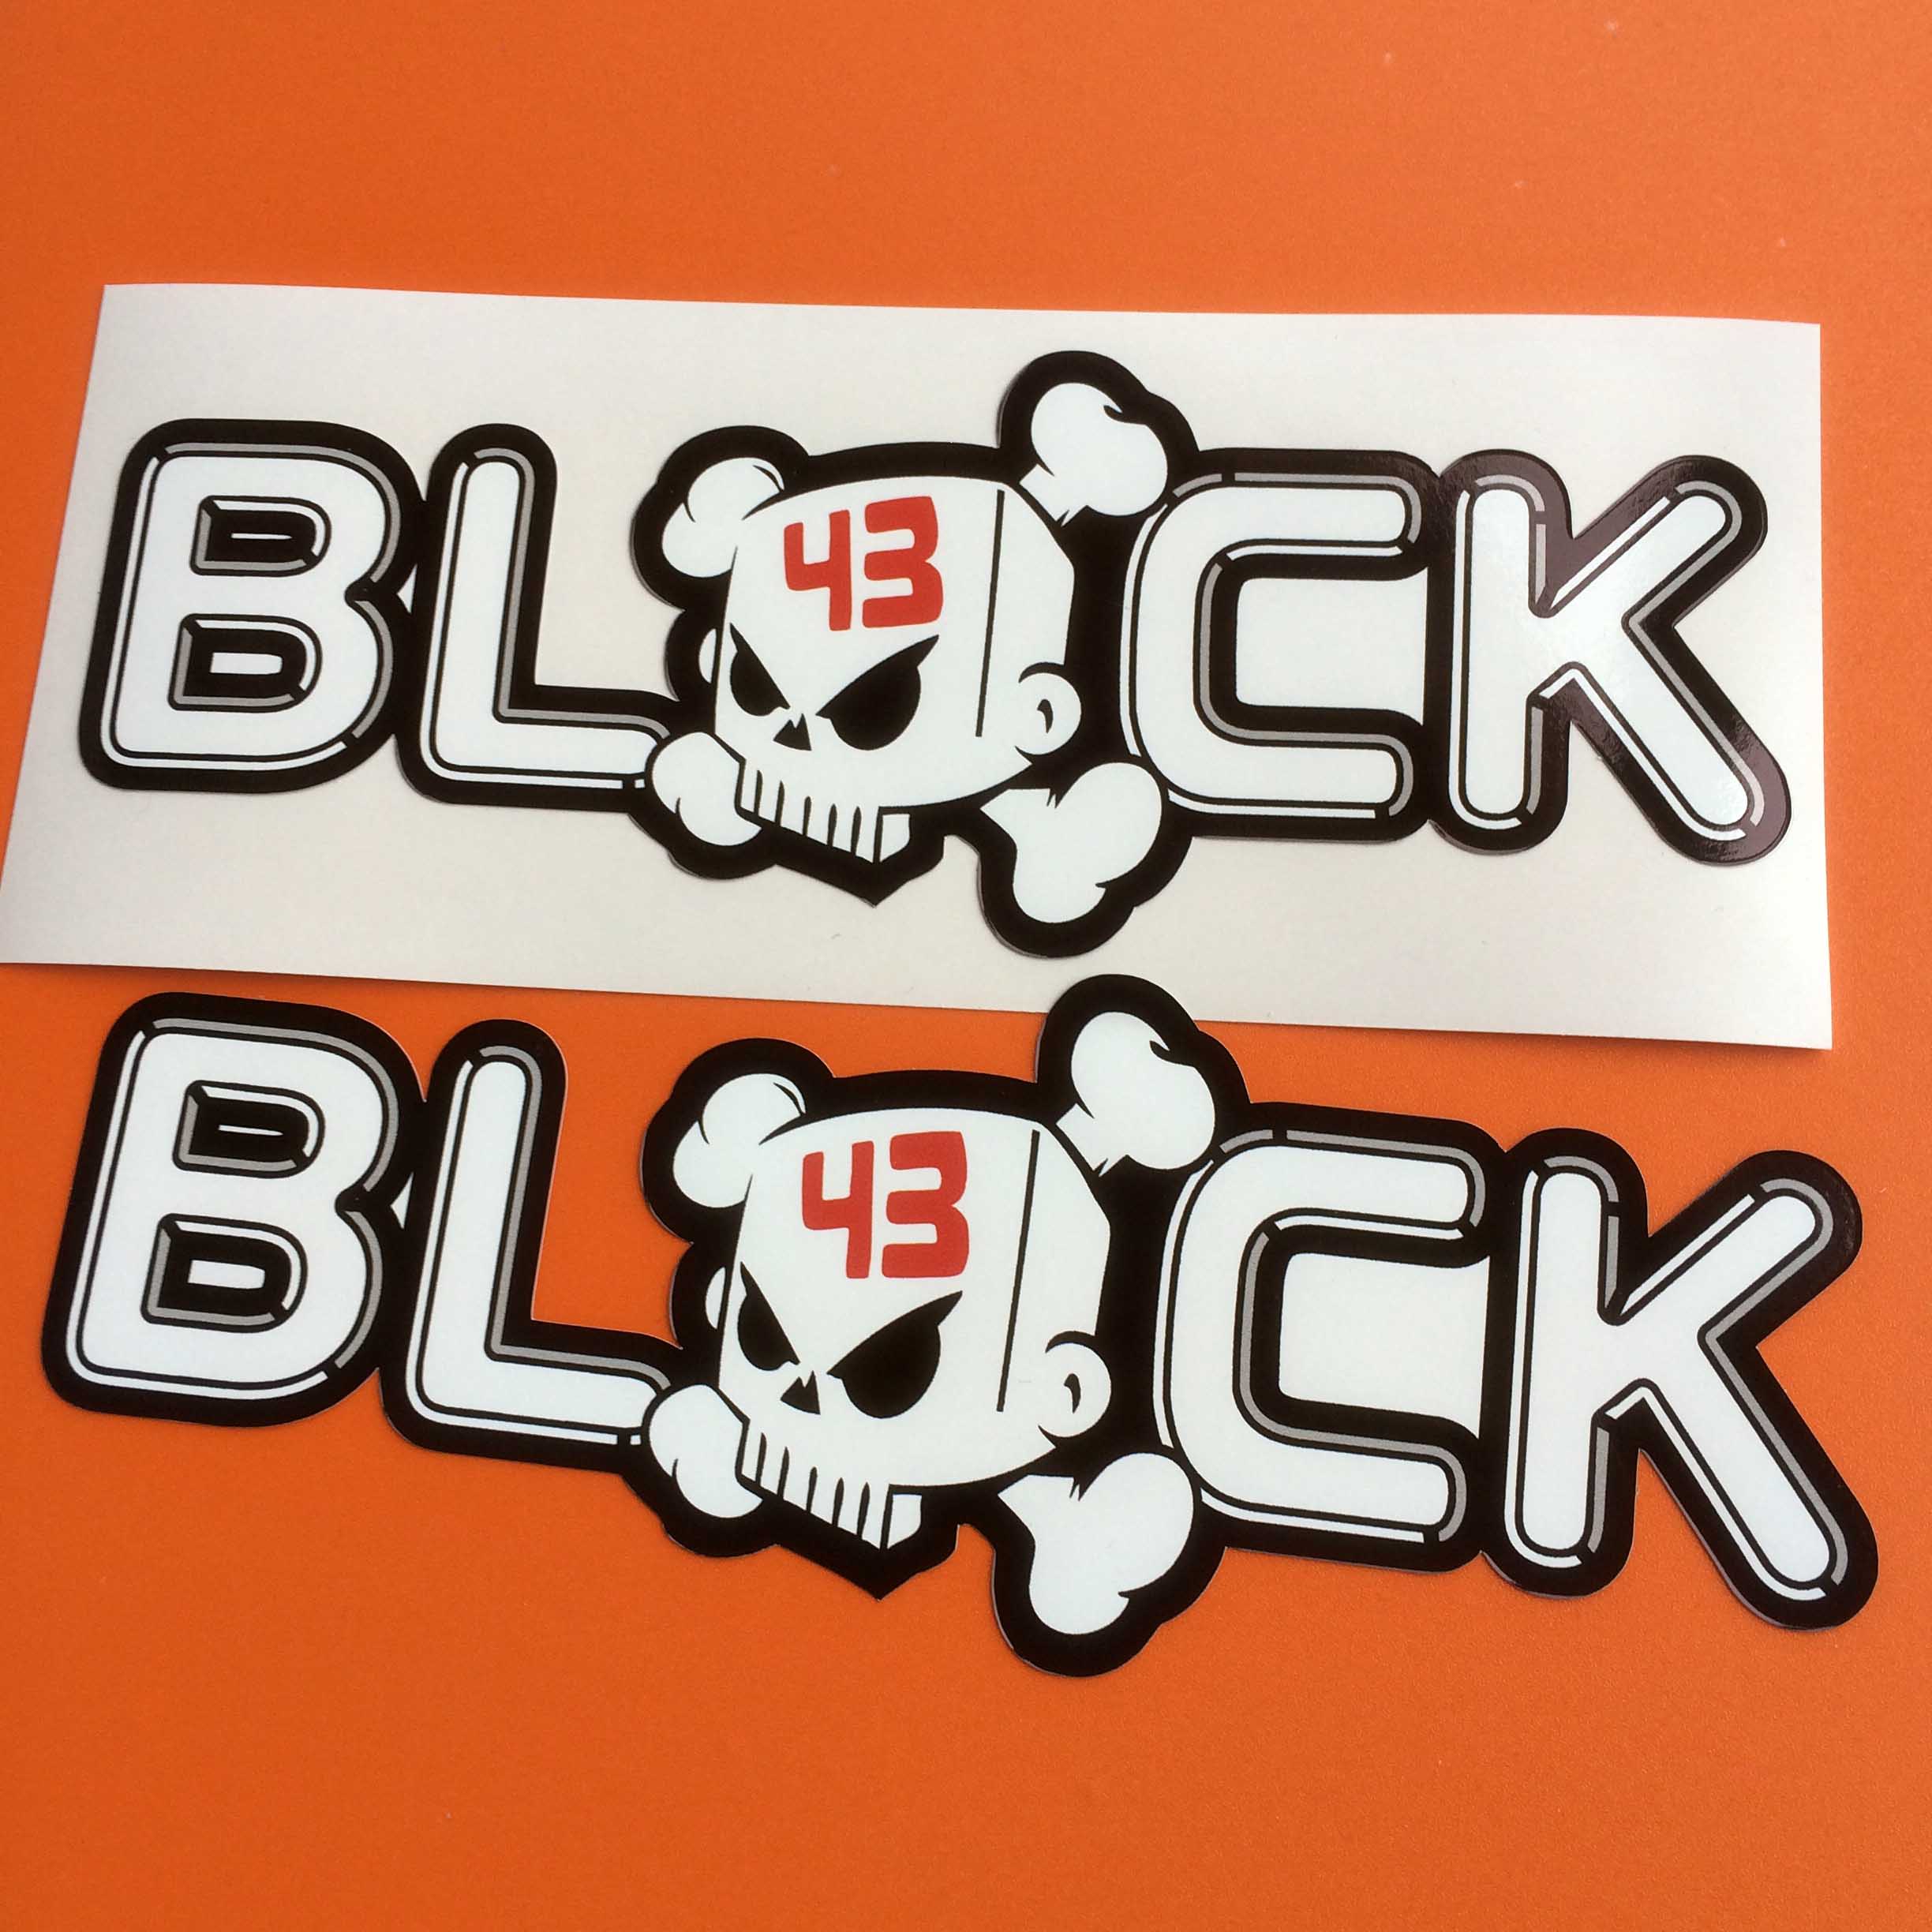 KEN BLOCK RALLY STICKERS. Block in white lettering edged in black. A white skull and crossbones with the number 43 in red on the forehead replaces the letter O in Block.